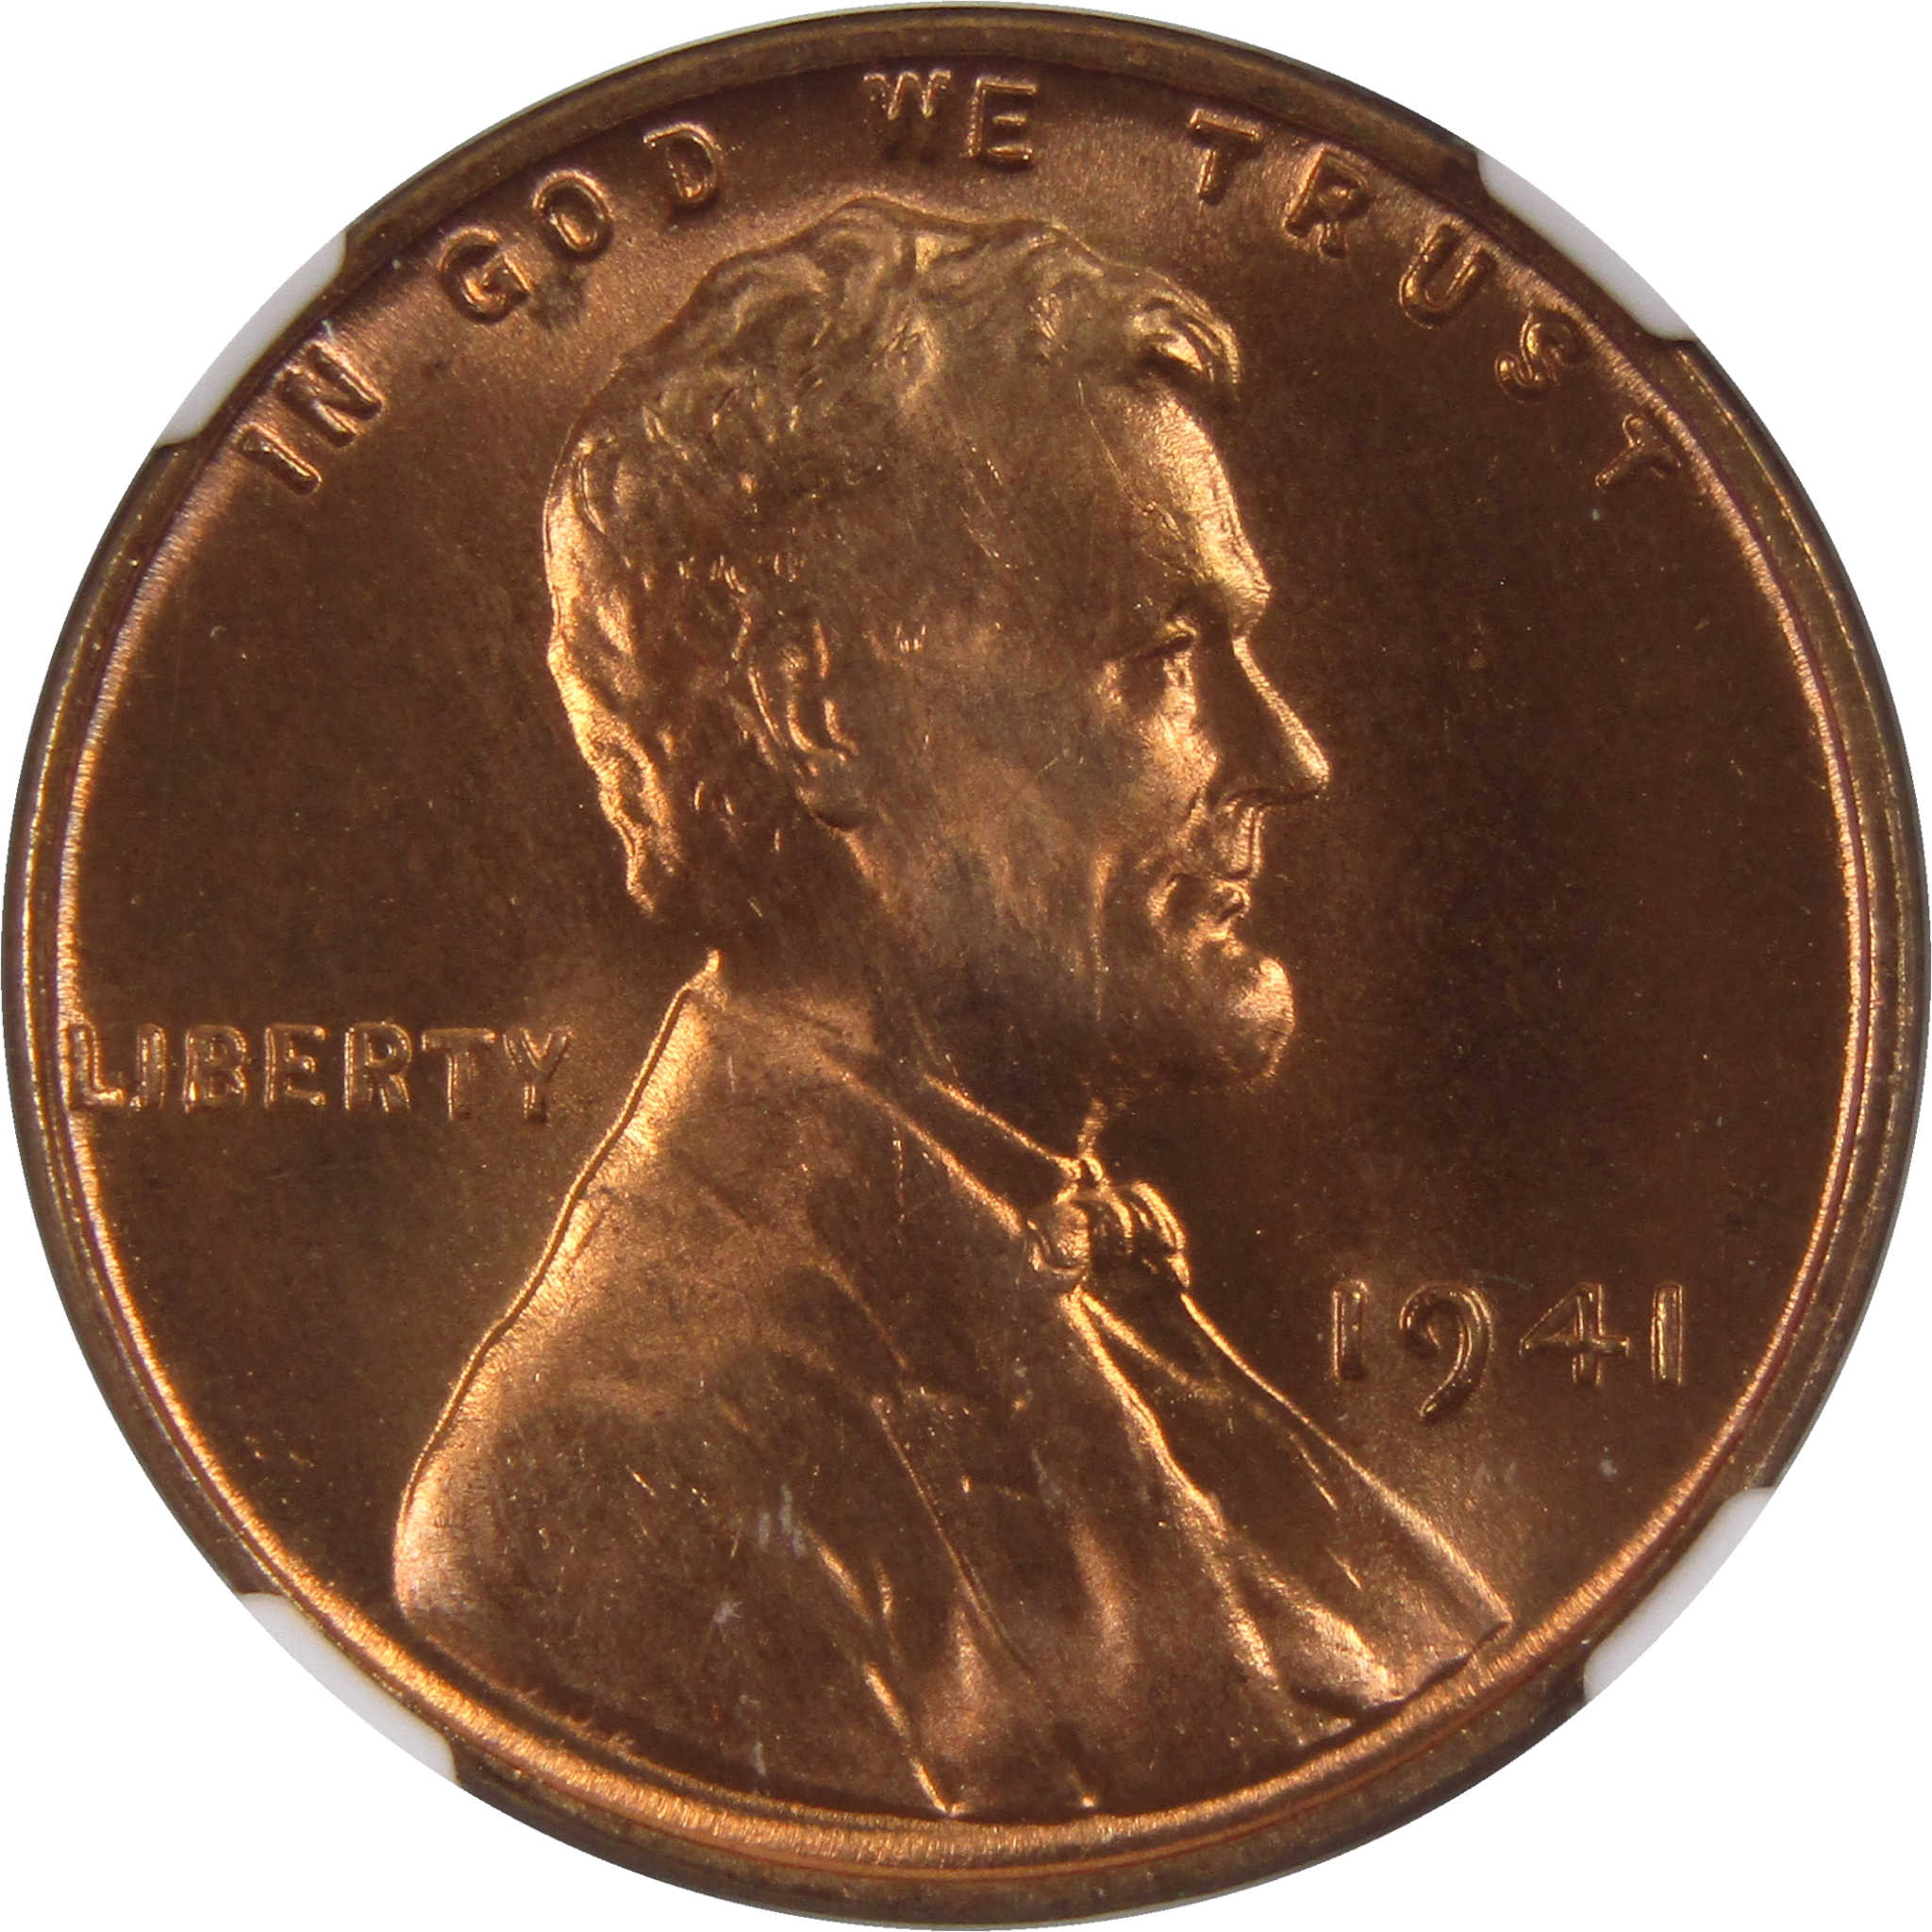 1941 Lincoln Wheat Cent MS 67 RD NGC Penny Uncirculated Coin SKU:I3169